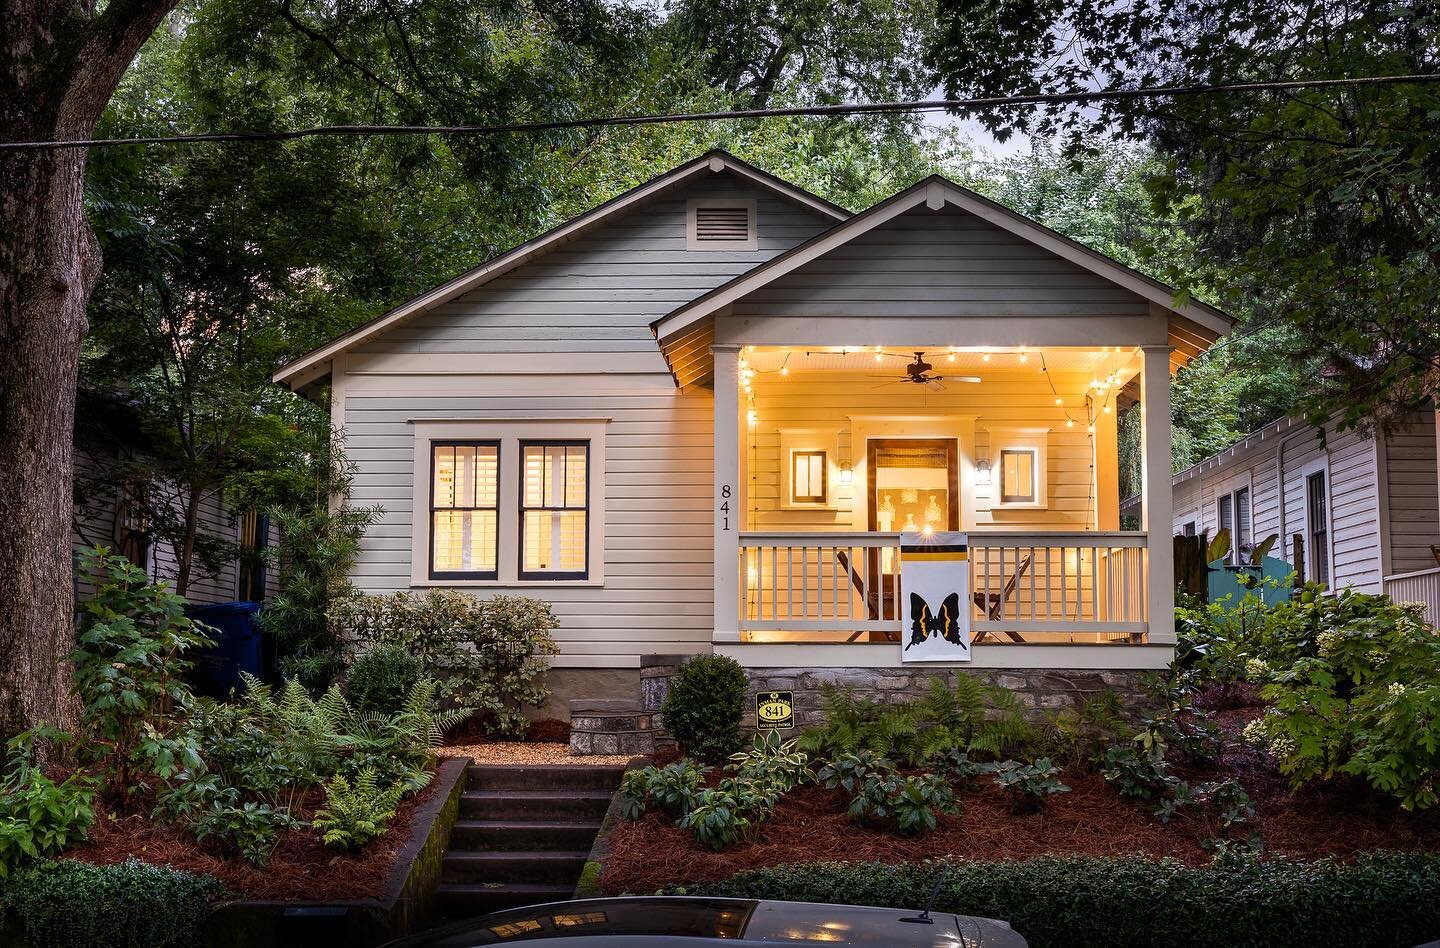 Just listed in Inman Park! This 2br/2ba bungalow is perched above one of the best streets in town, walkable to everything, and updated throughout. 841 Virgil St, offered for $650,000. Contact Kyle Jackson for more information.